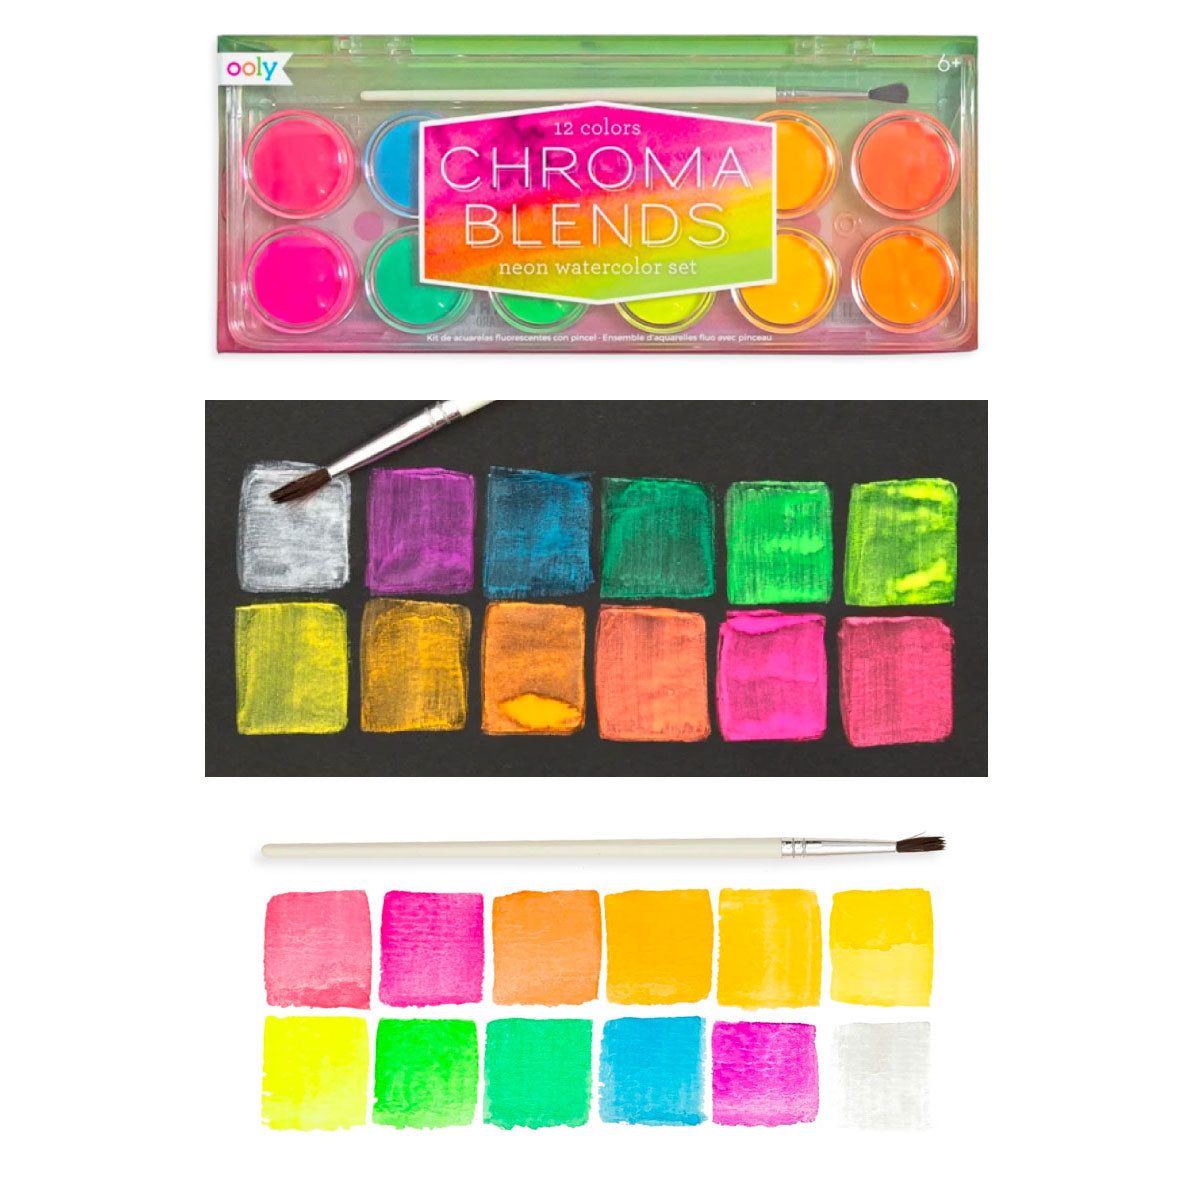 Chroma Blends Neon Watercolor Paints from Ooly